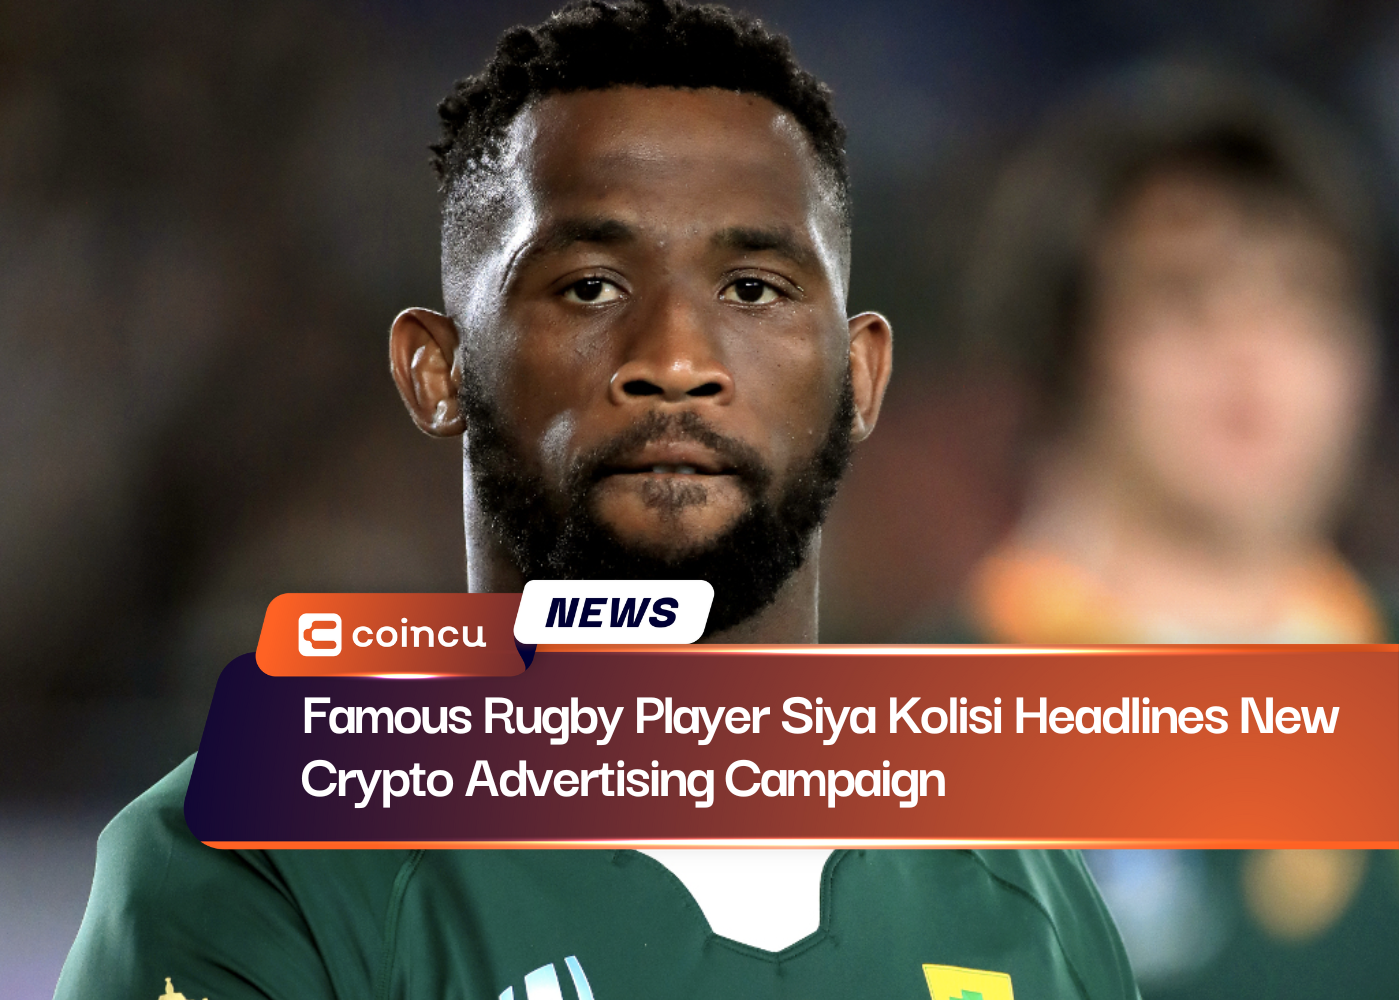 Famous Rugby Player Siya Kolisi Headlines New Crypto Advertising Campaign